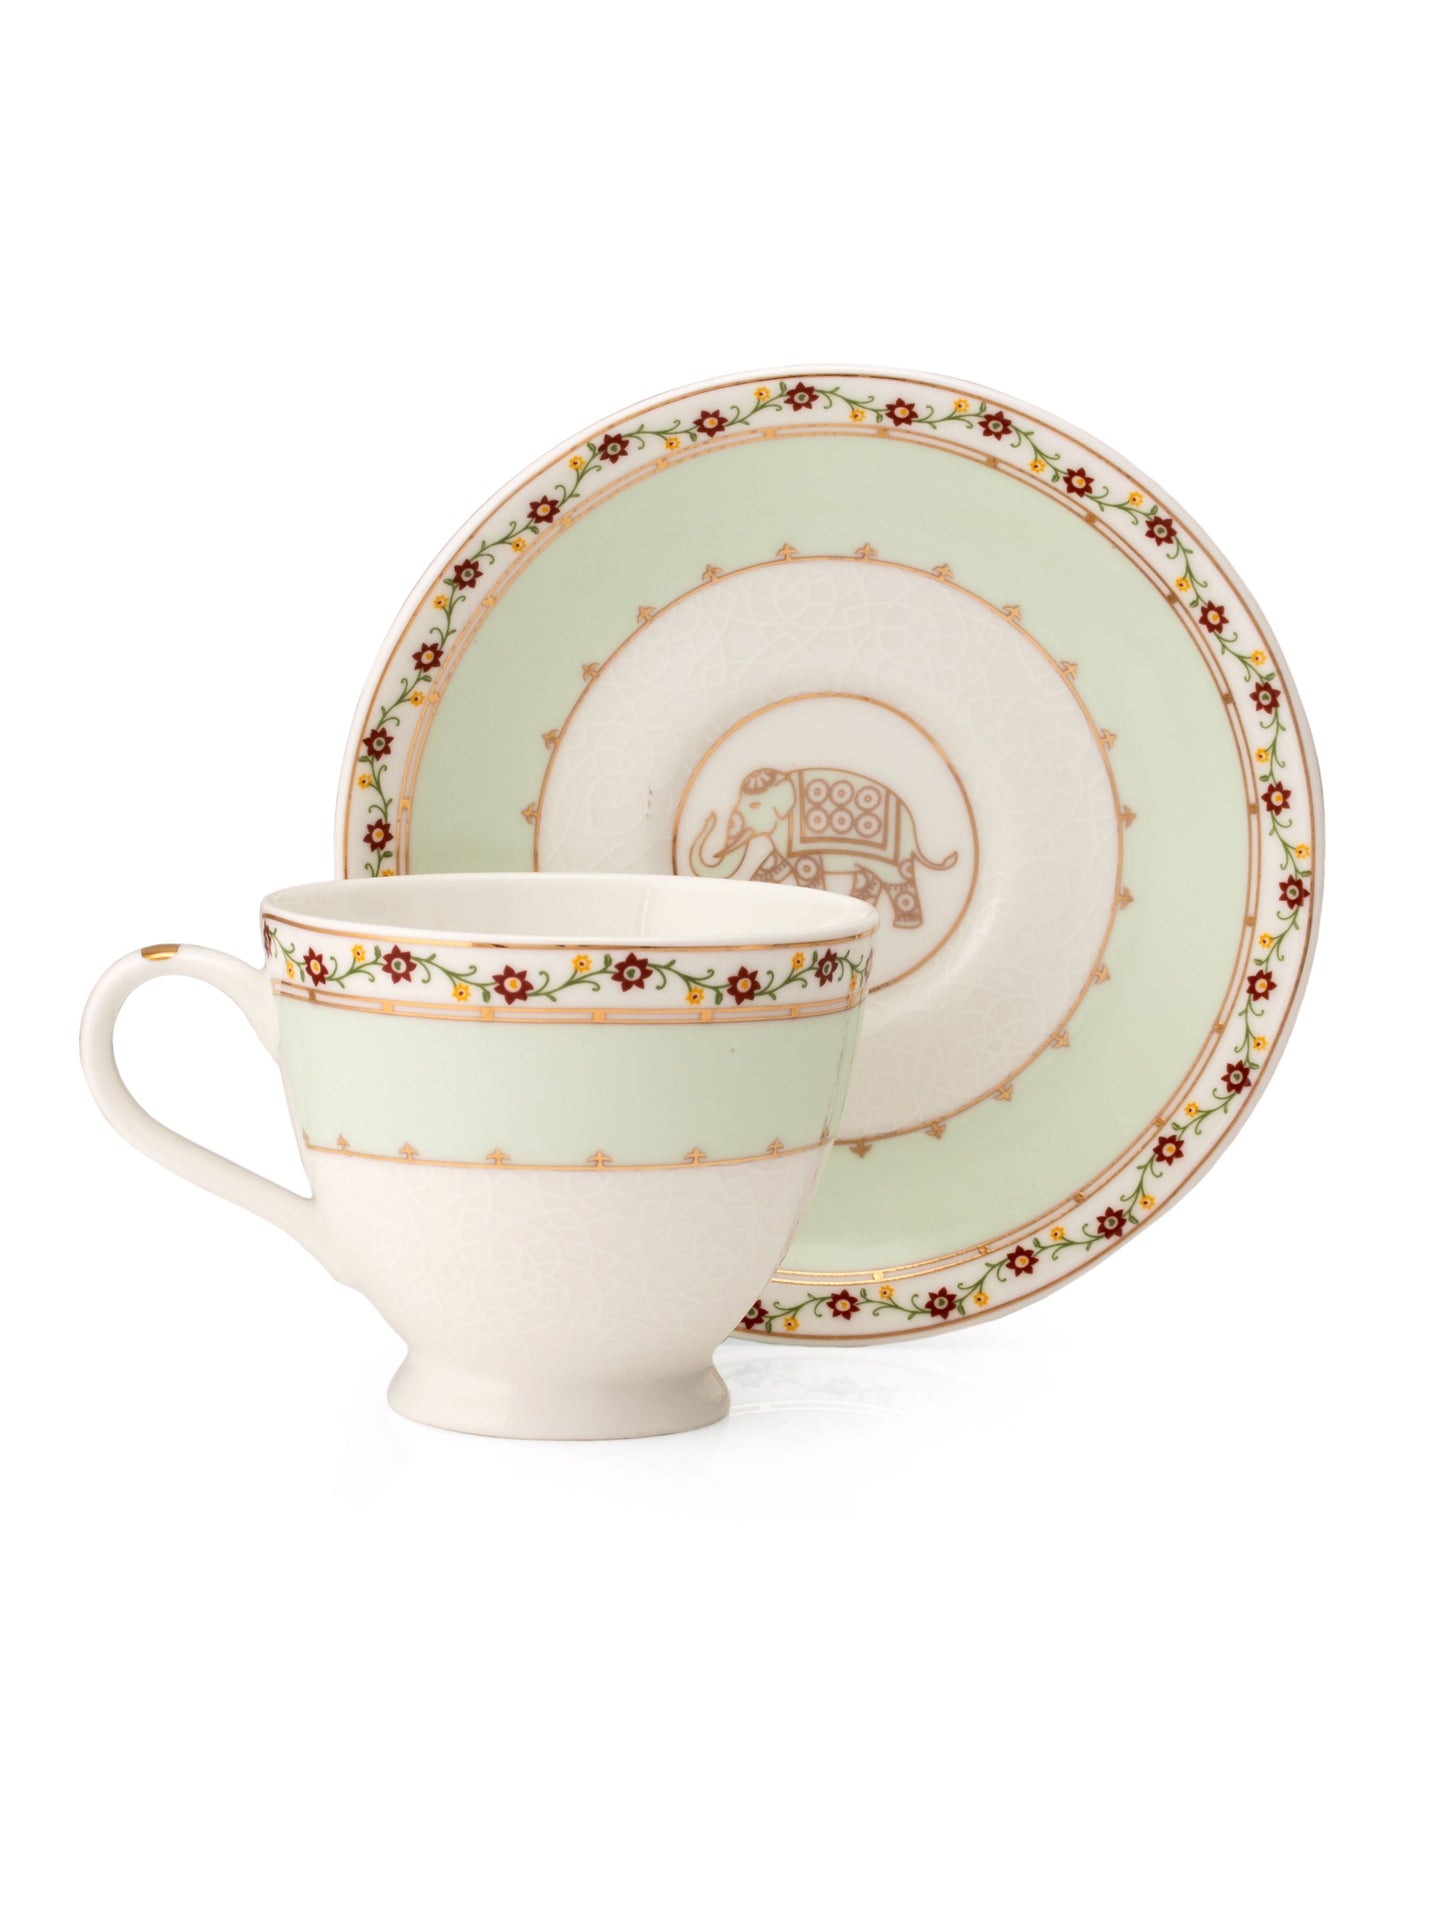 JCPL King Crysta Cup & Saucer, 160ml, Set of 12 (6 Cups + 6 Saucers) (CR402)